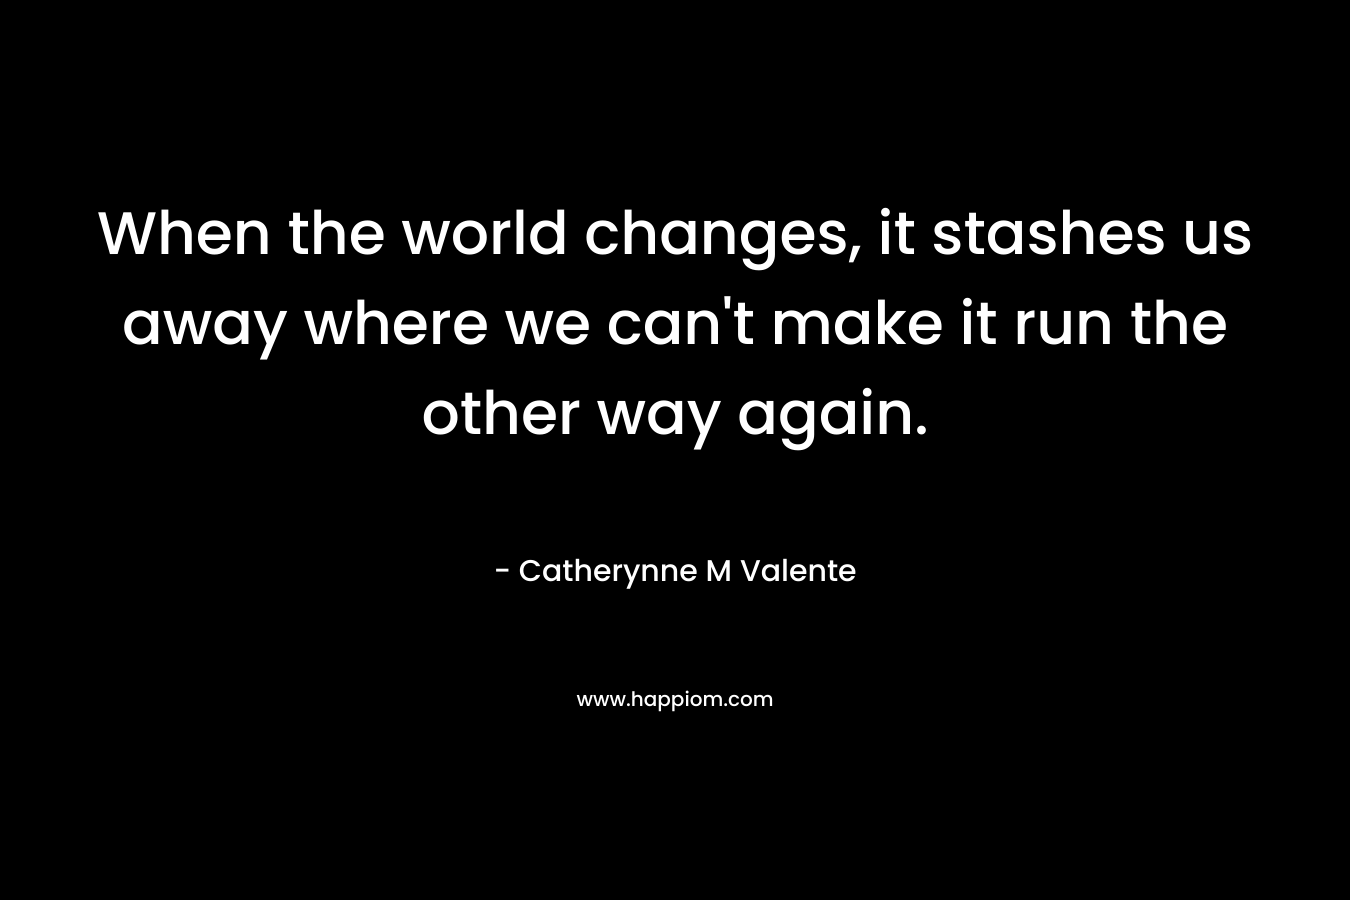 When the world changes, it stashes us away where we can’t make it run the other way again. – Catherynne M Valente